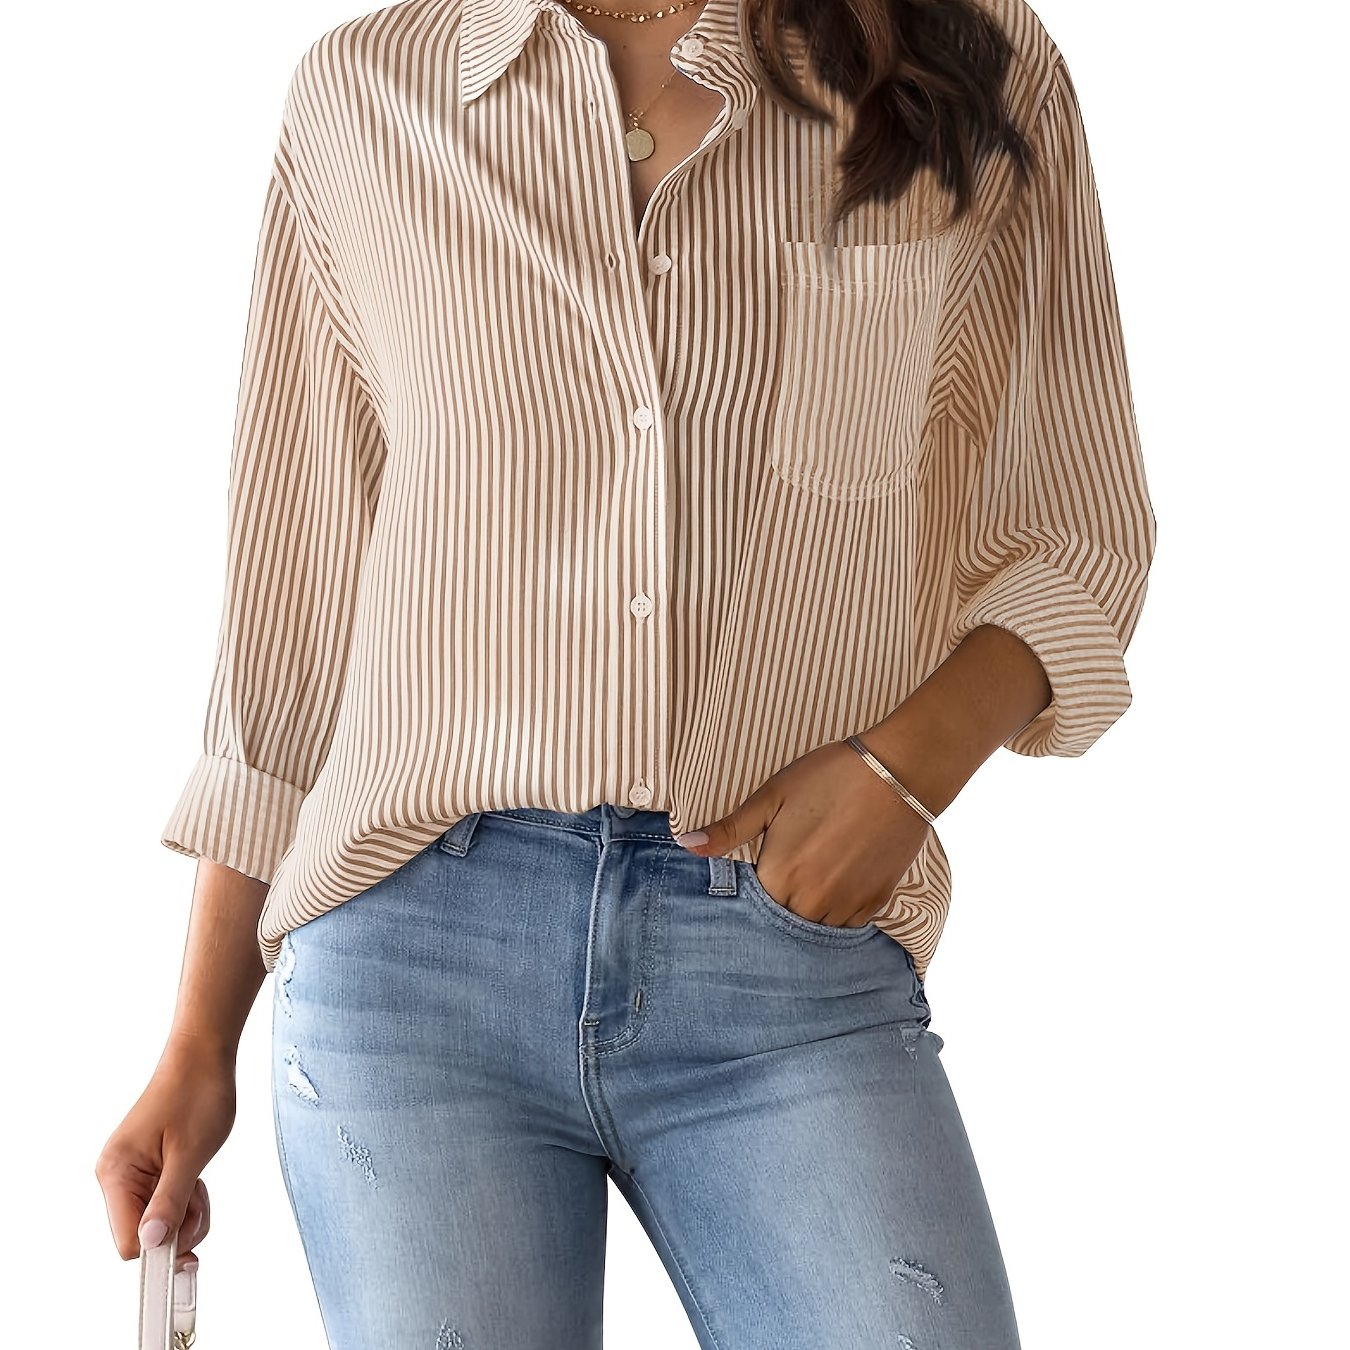 「binfenxie」Women's Loose Striped Blouse, Crew Neck Long Sleeve Blouse, Casual Every Day Blouse, Women's Clothing